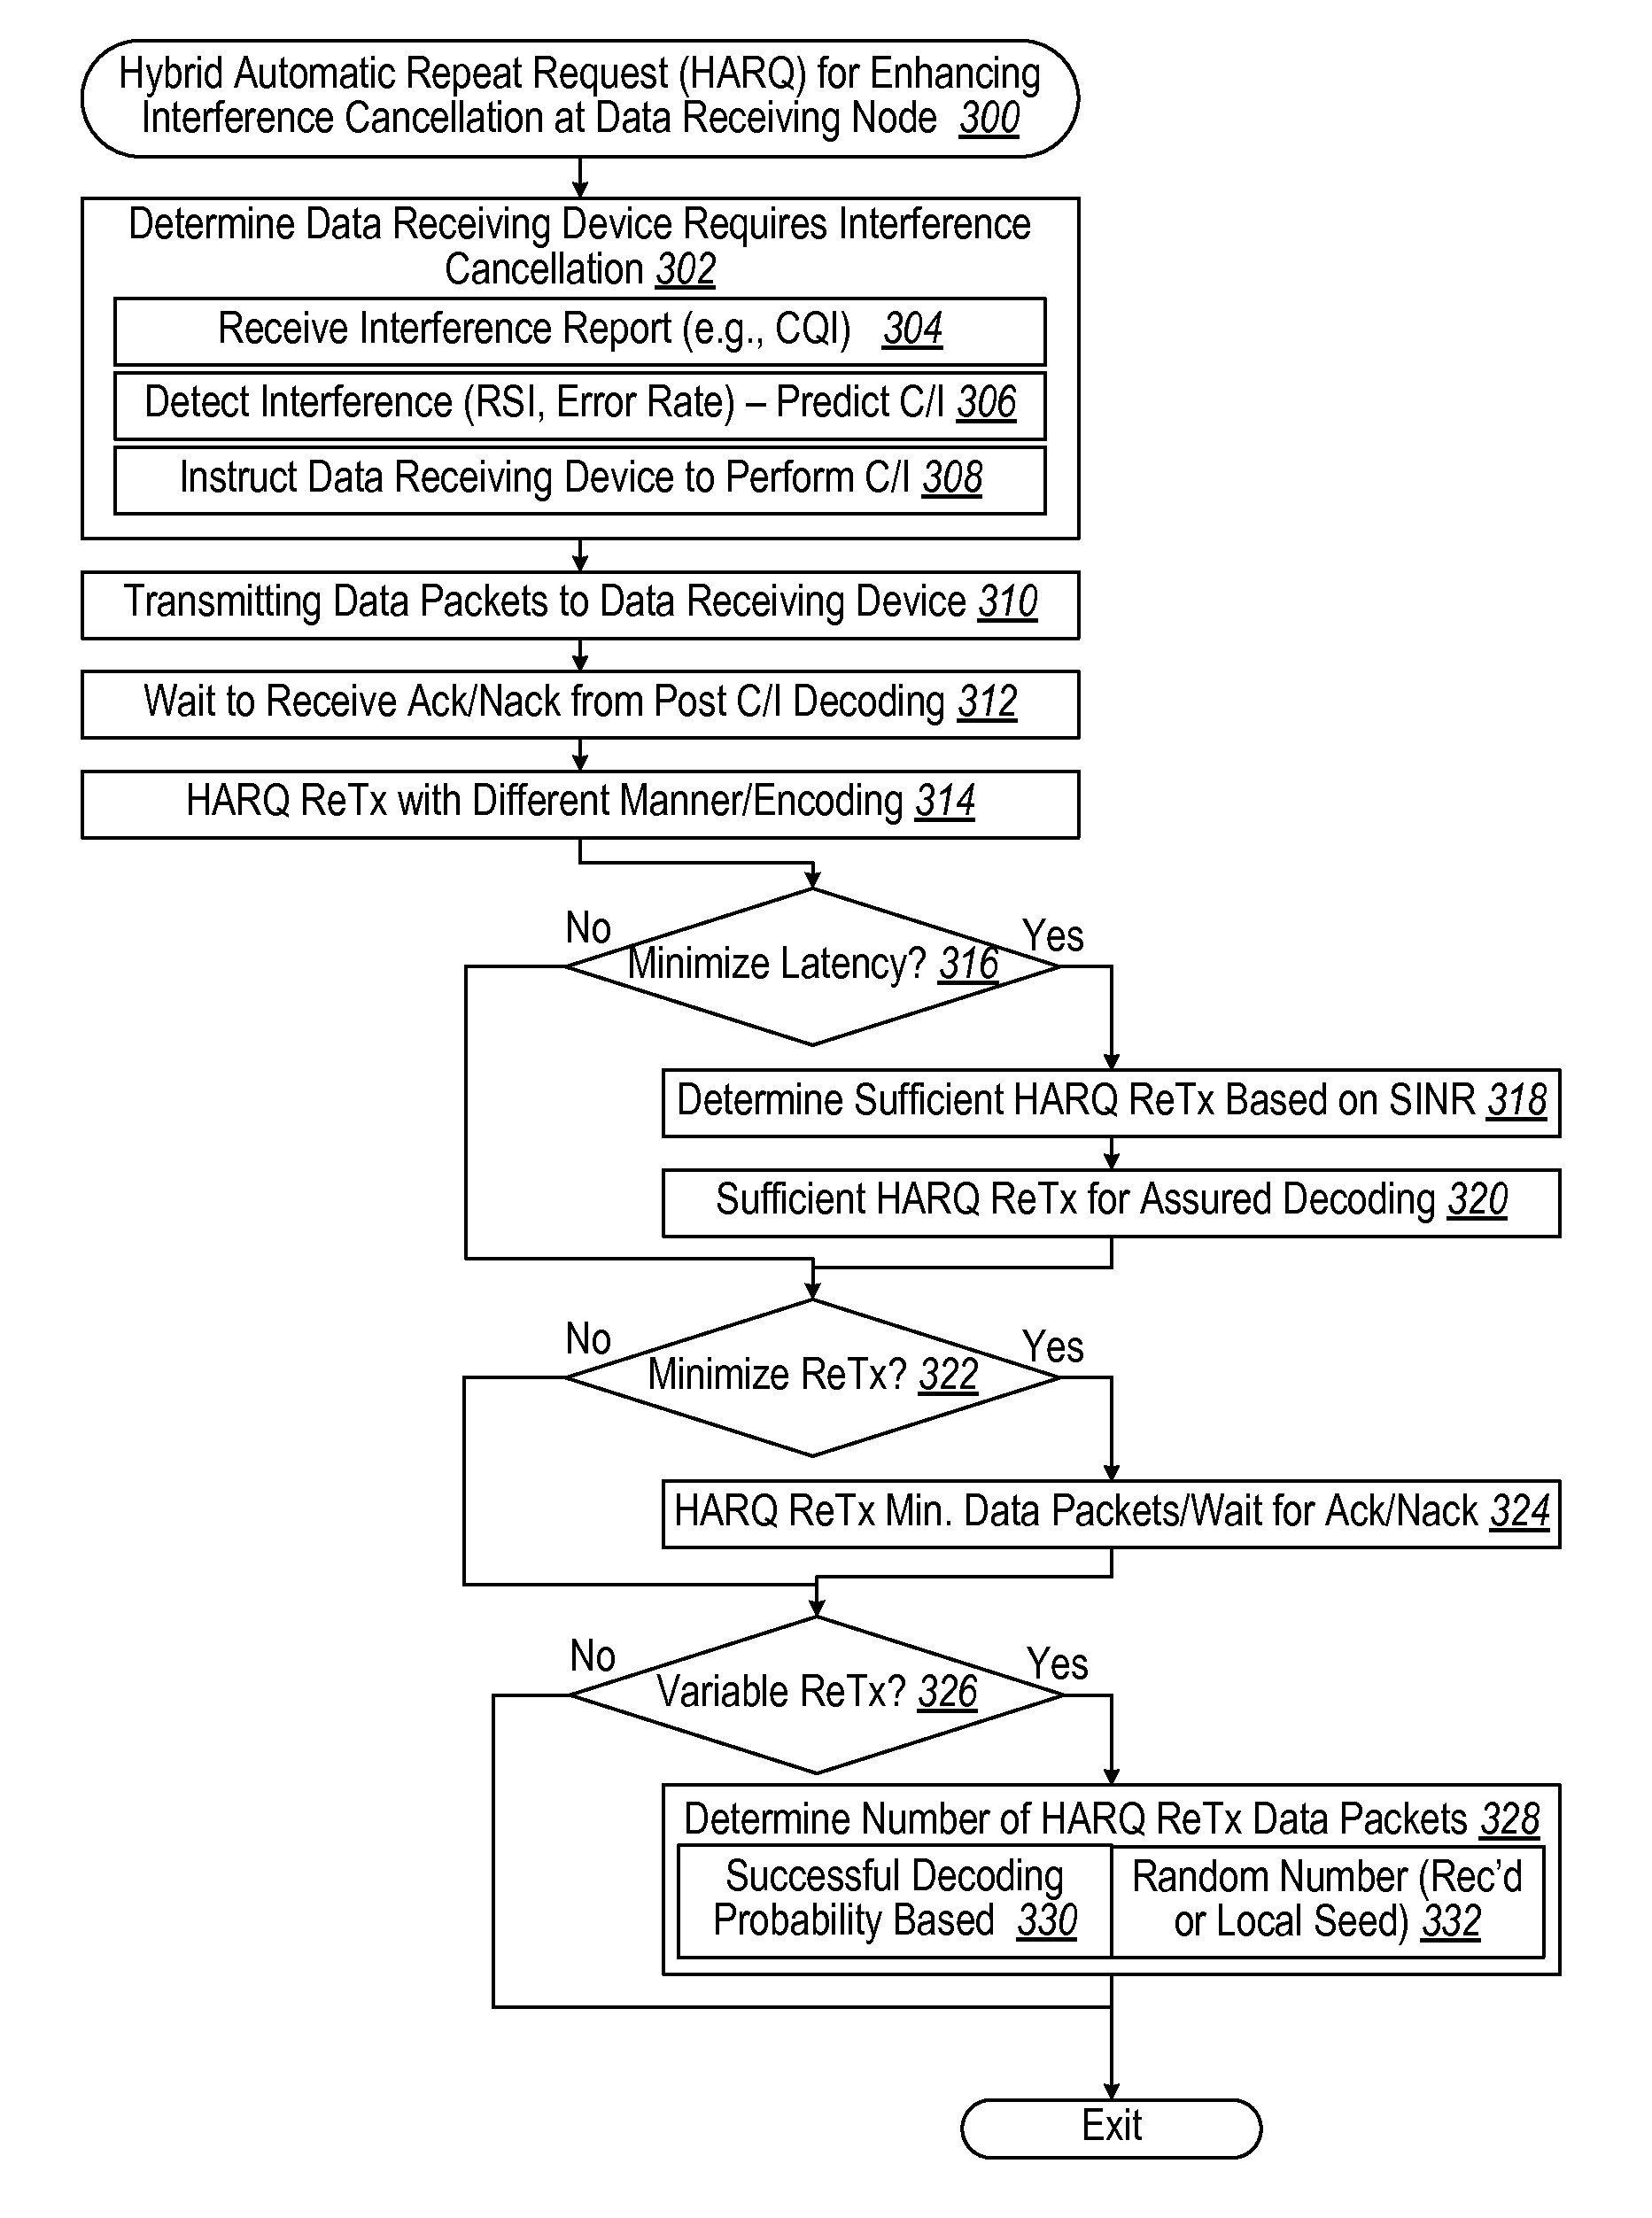 Systems and methods for uplink inter-cell interference cancellation using hybrid automatic repeat request (HARQ) retransmissions